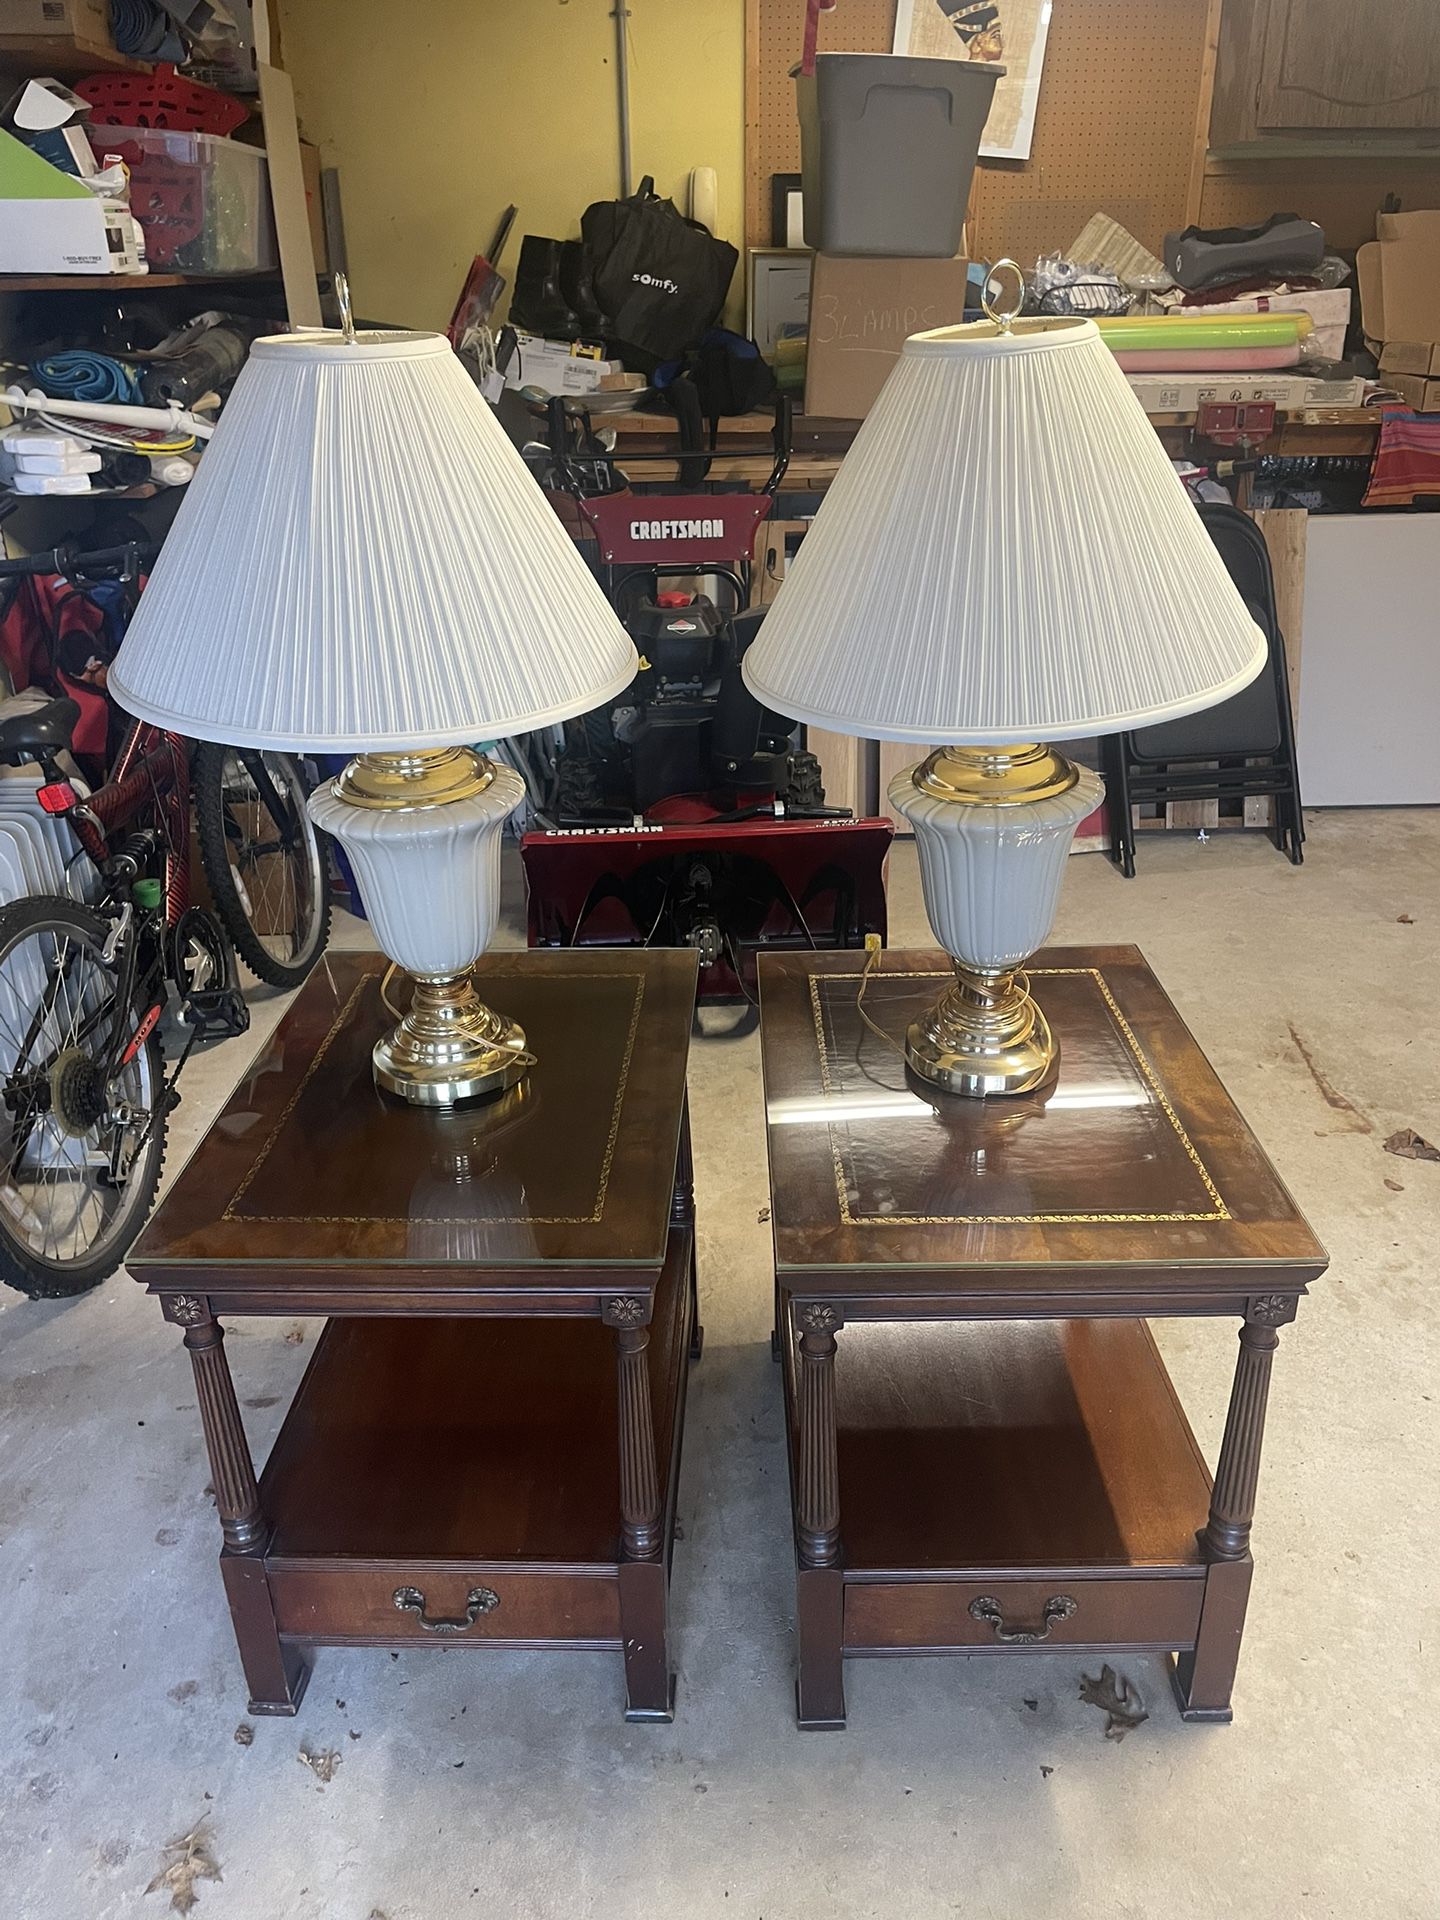 2 Lenox Like Lamps And 2 End Tables With Glass Tap